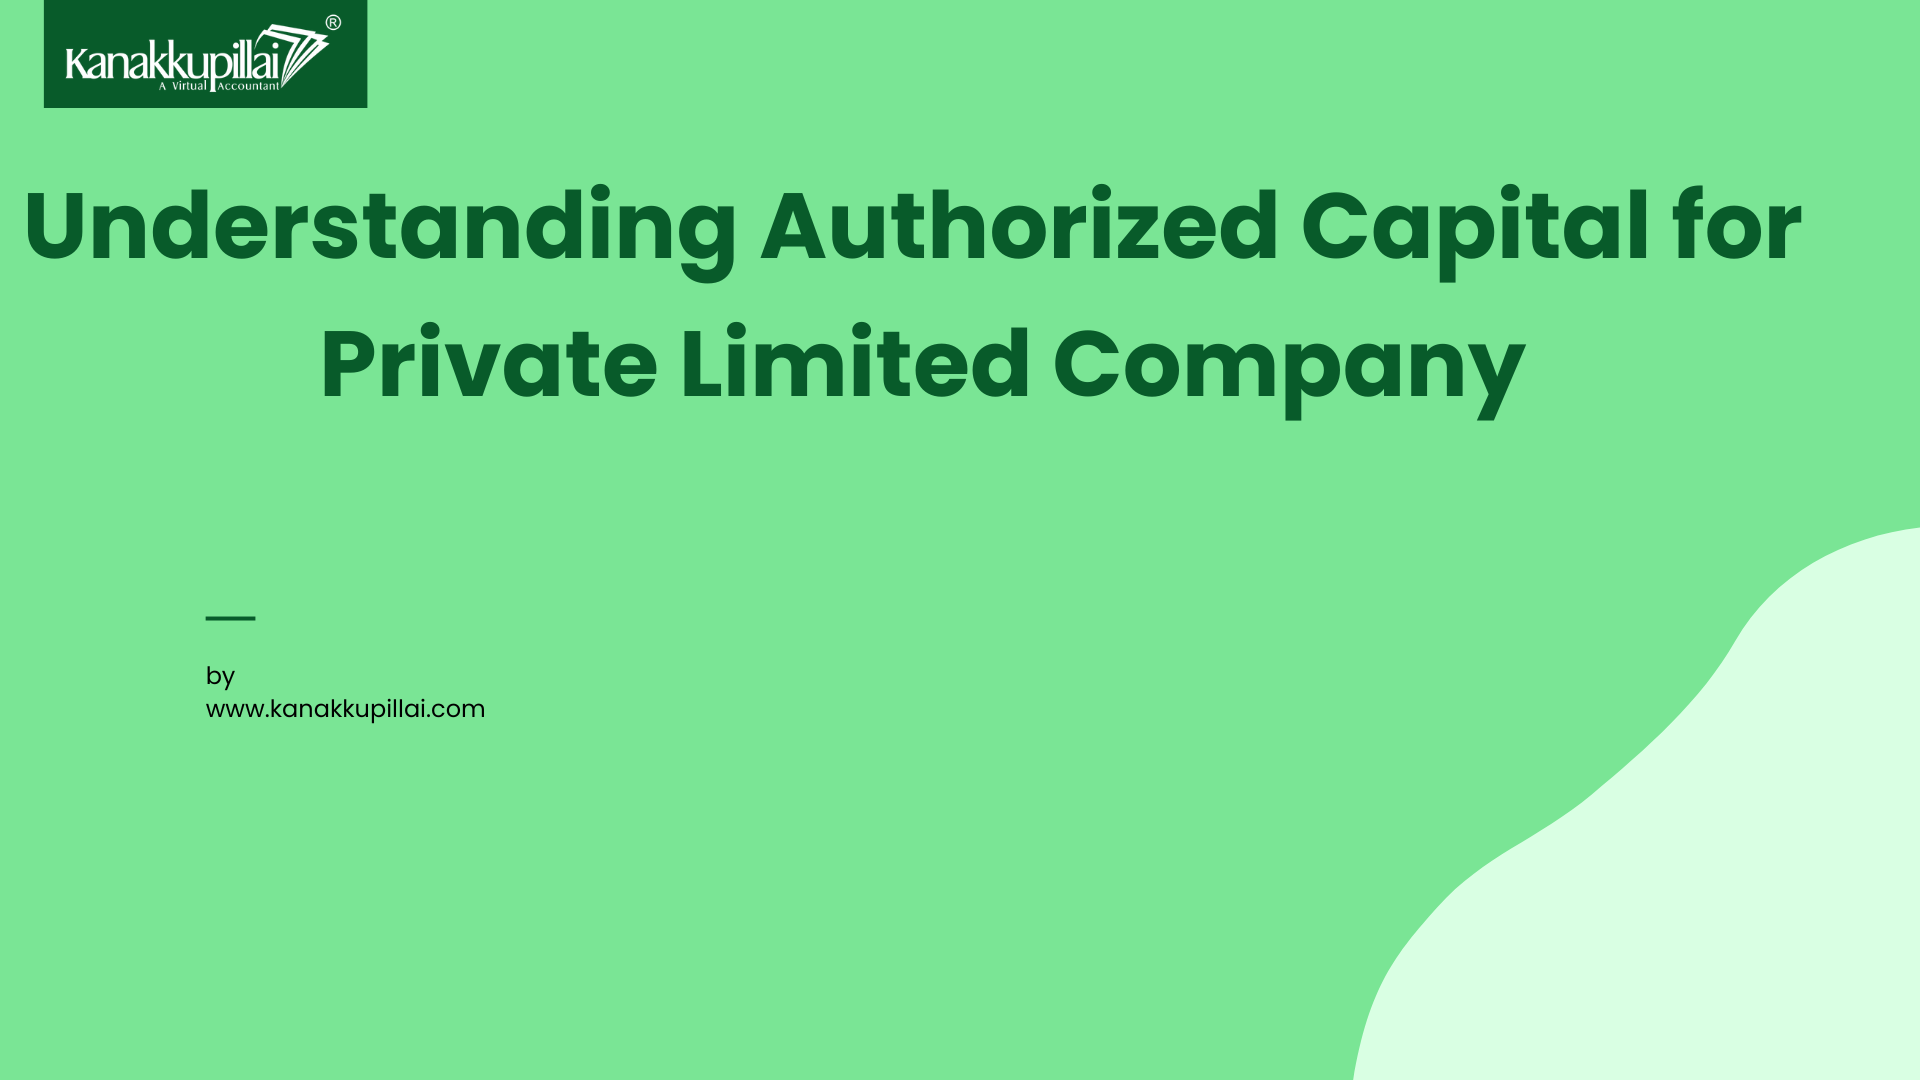 Understanding Authorized Capital for a Private Limited Company